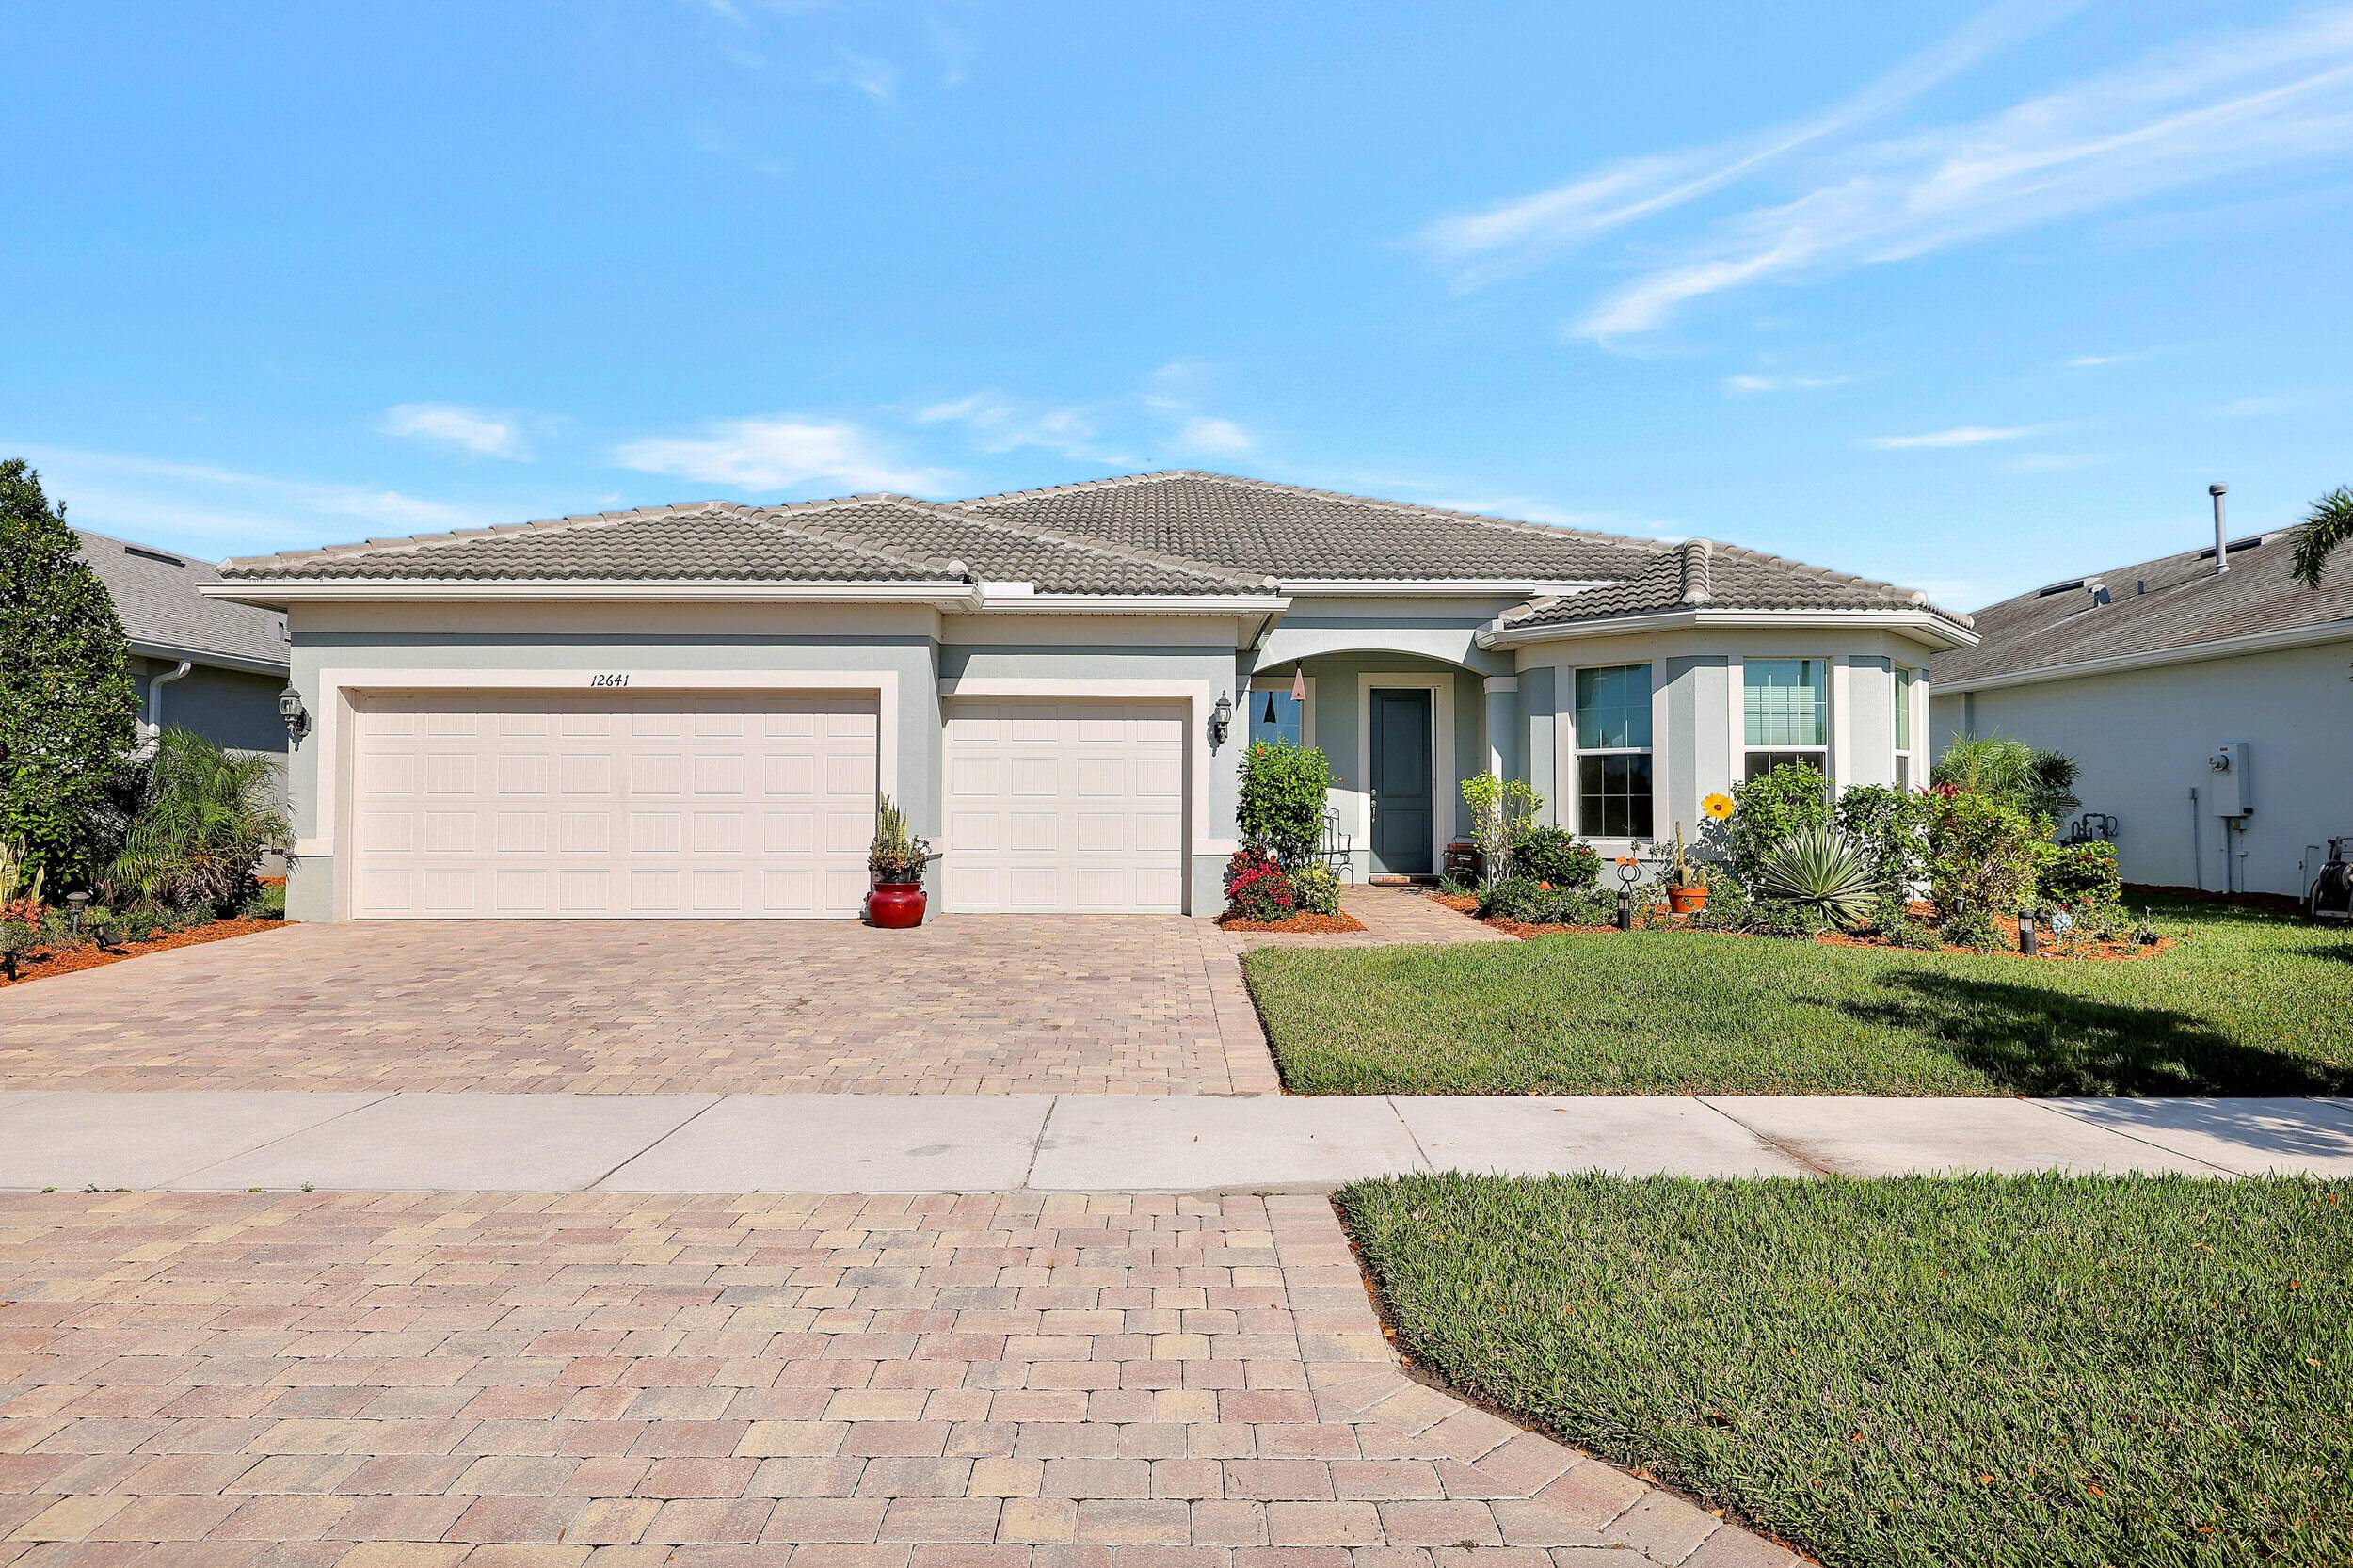 Welcome to the epitome of vibrant 55 living at Del Webb in the heart of Tradition, Port Saint Lucie.